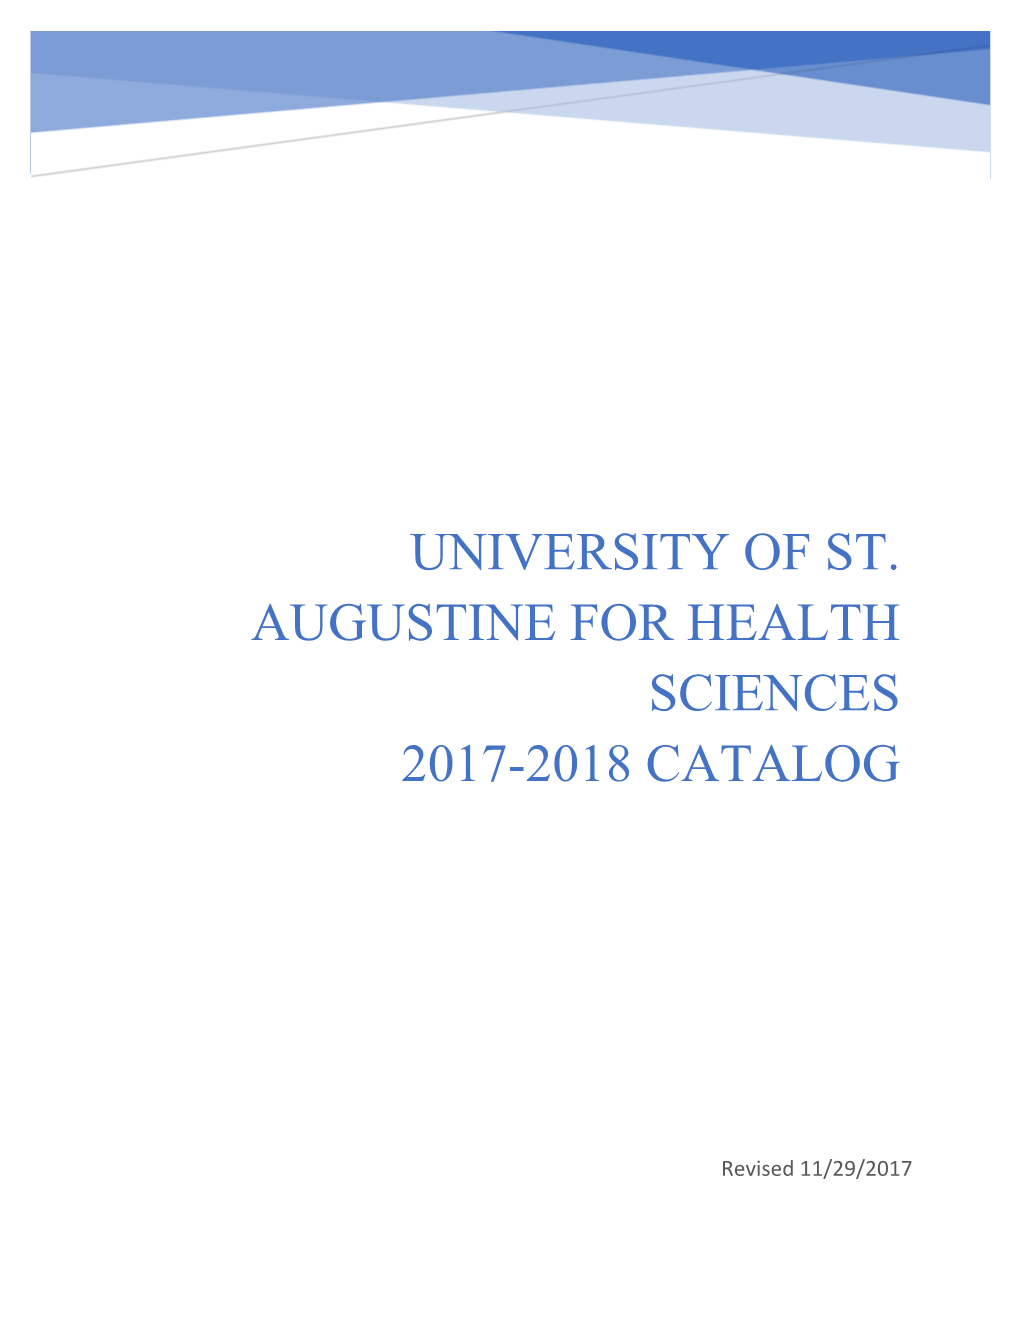 University of St. Augustine for Health Sciences 2017-2018 Catalog